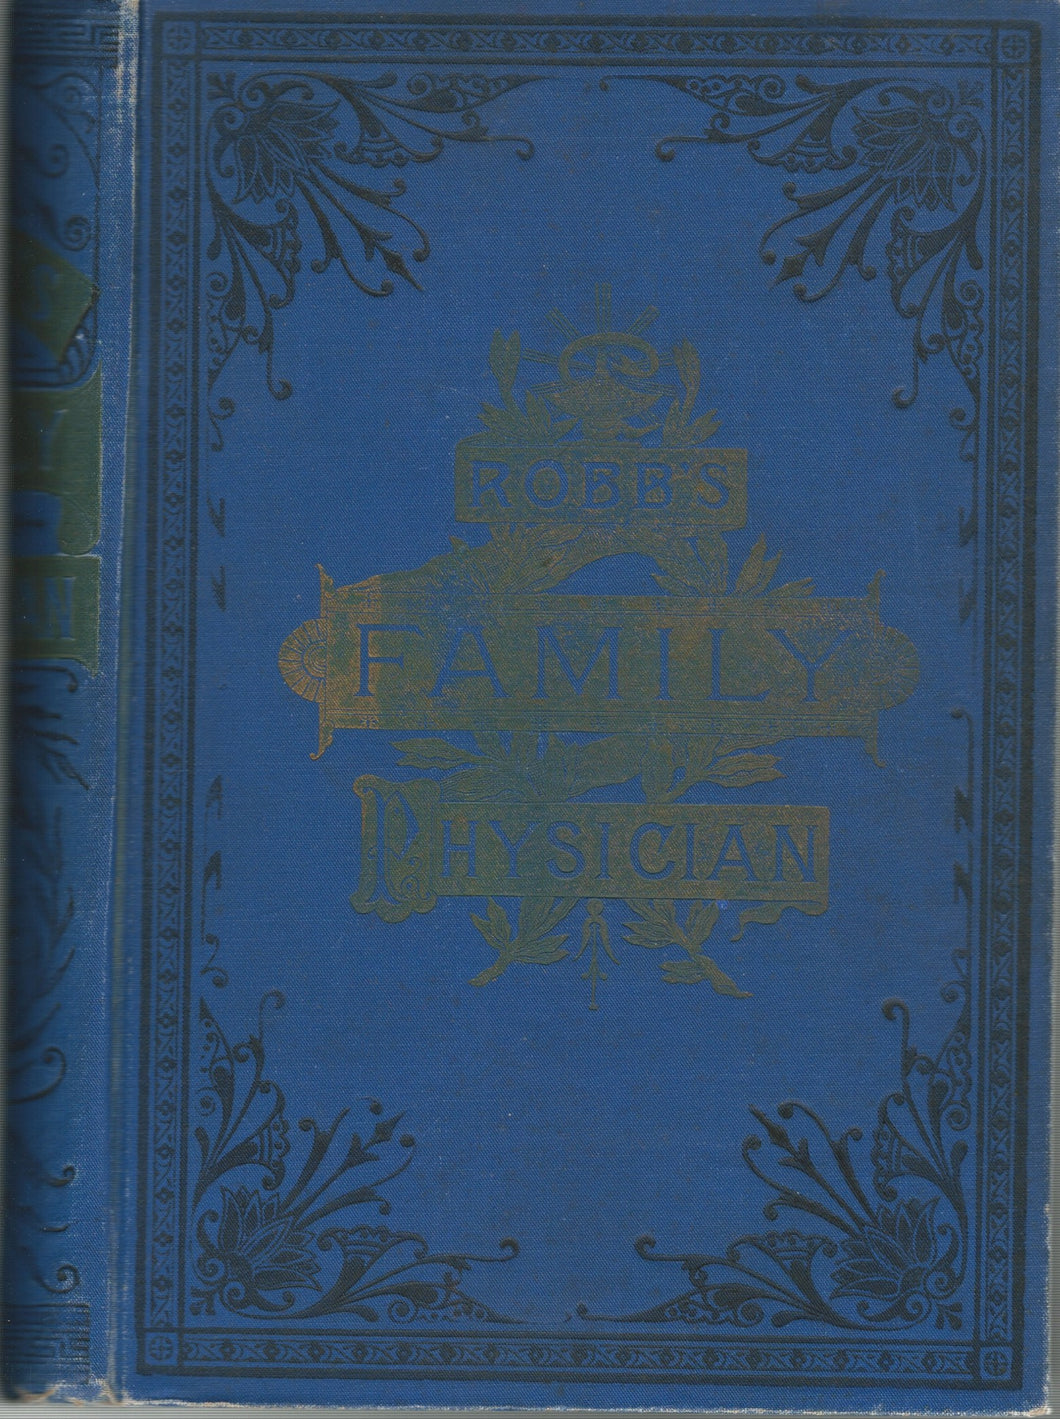 Robb's Family Physician, Being a Concise and Comprehensive Treatise on Diseases, by J.V. Bean, R.L. Robb, & S.L. Robb, 1883